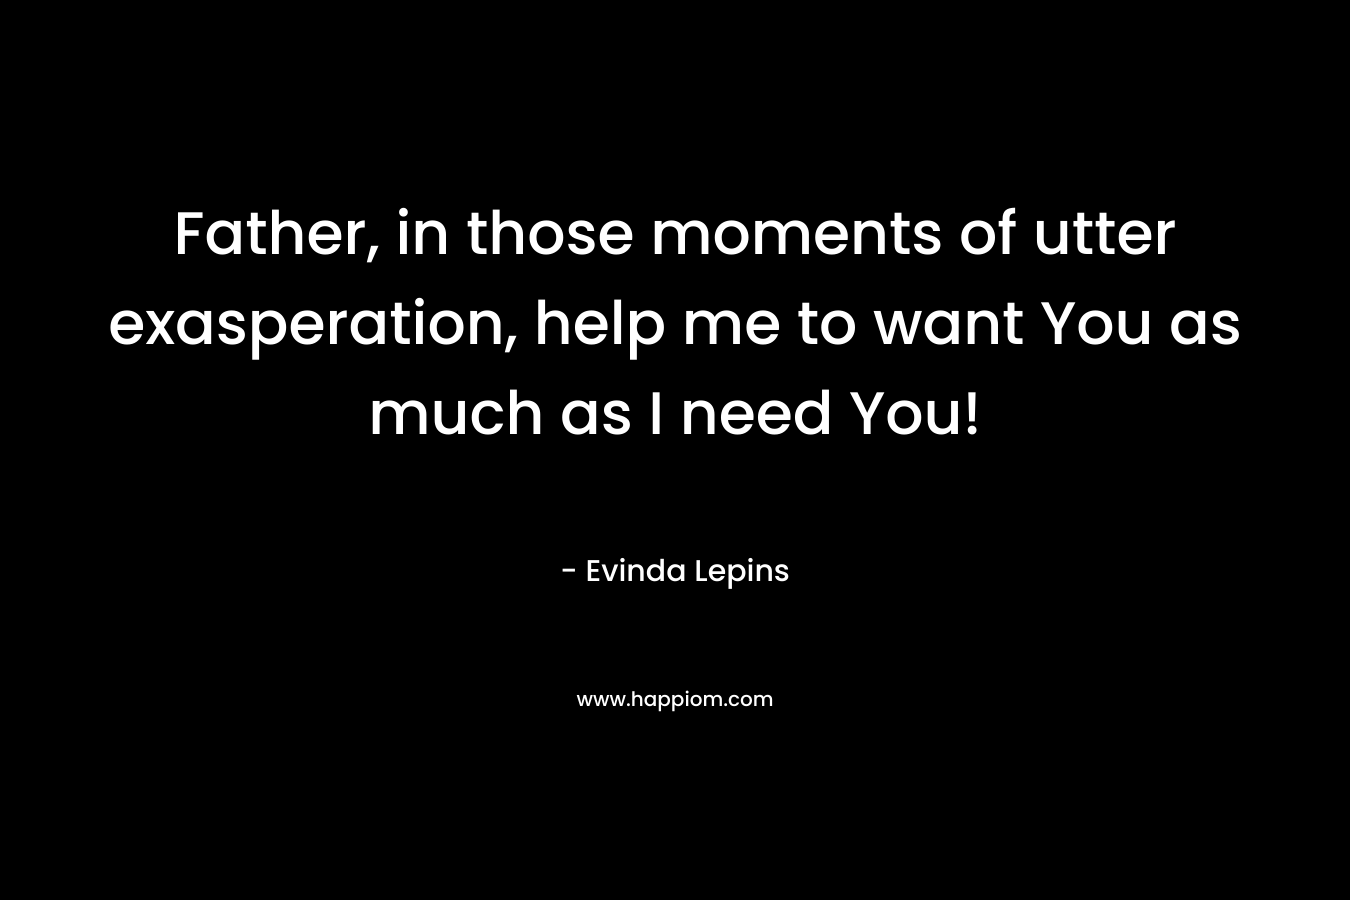 Father, in those moments of utter exasperation, help me to want You as much as I need You!